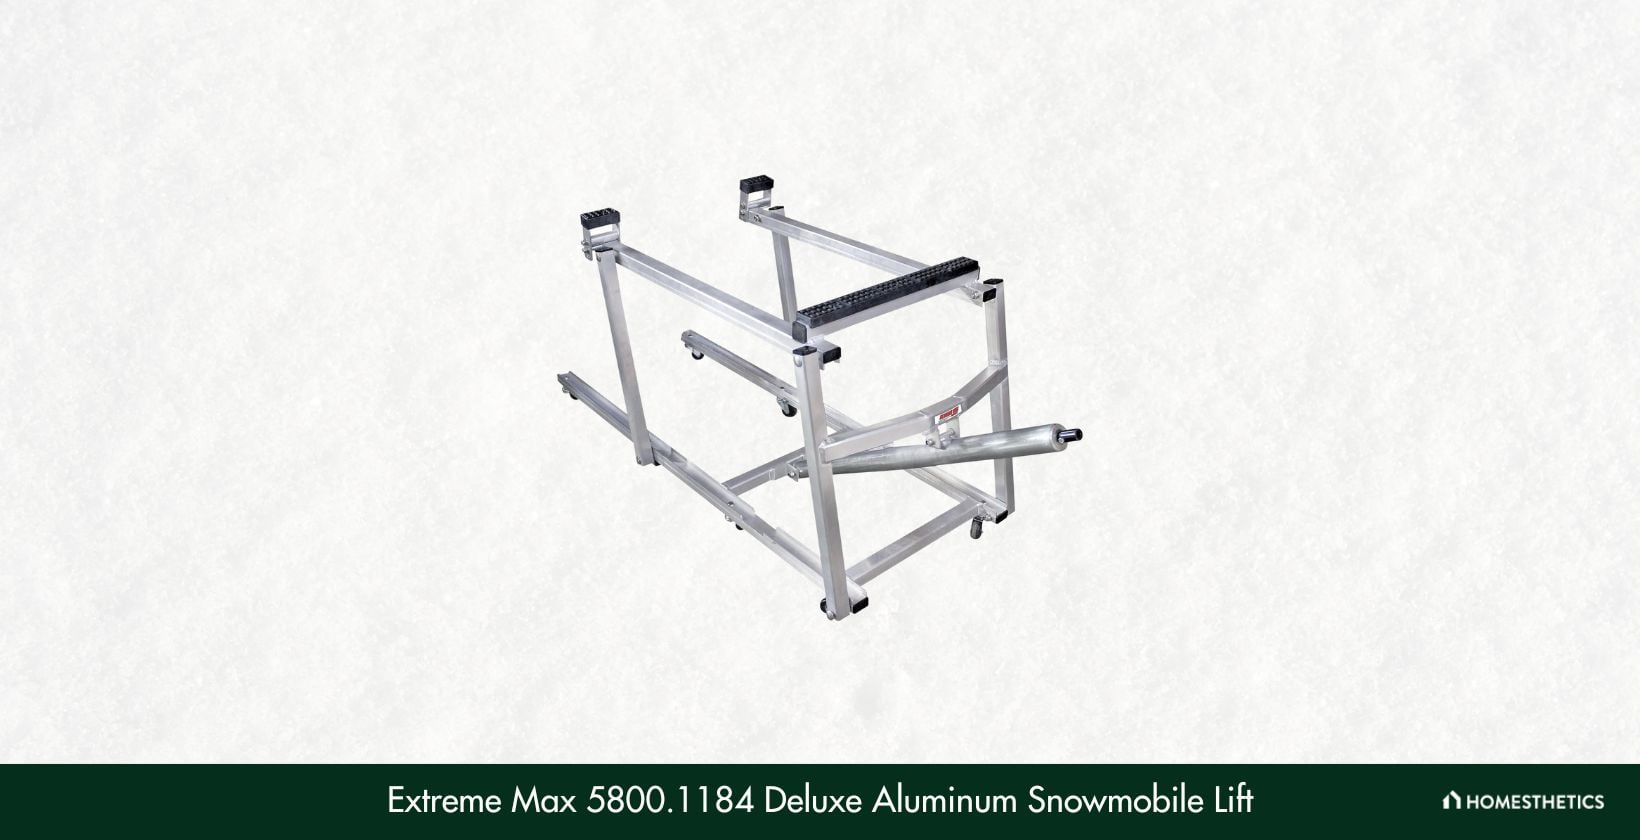 Extreme Max 5800.1184 Deluxe Aluminum Snowmobile Lift 1